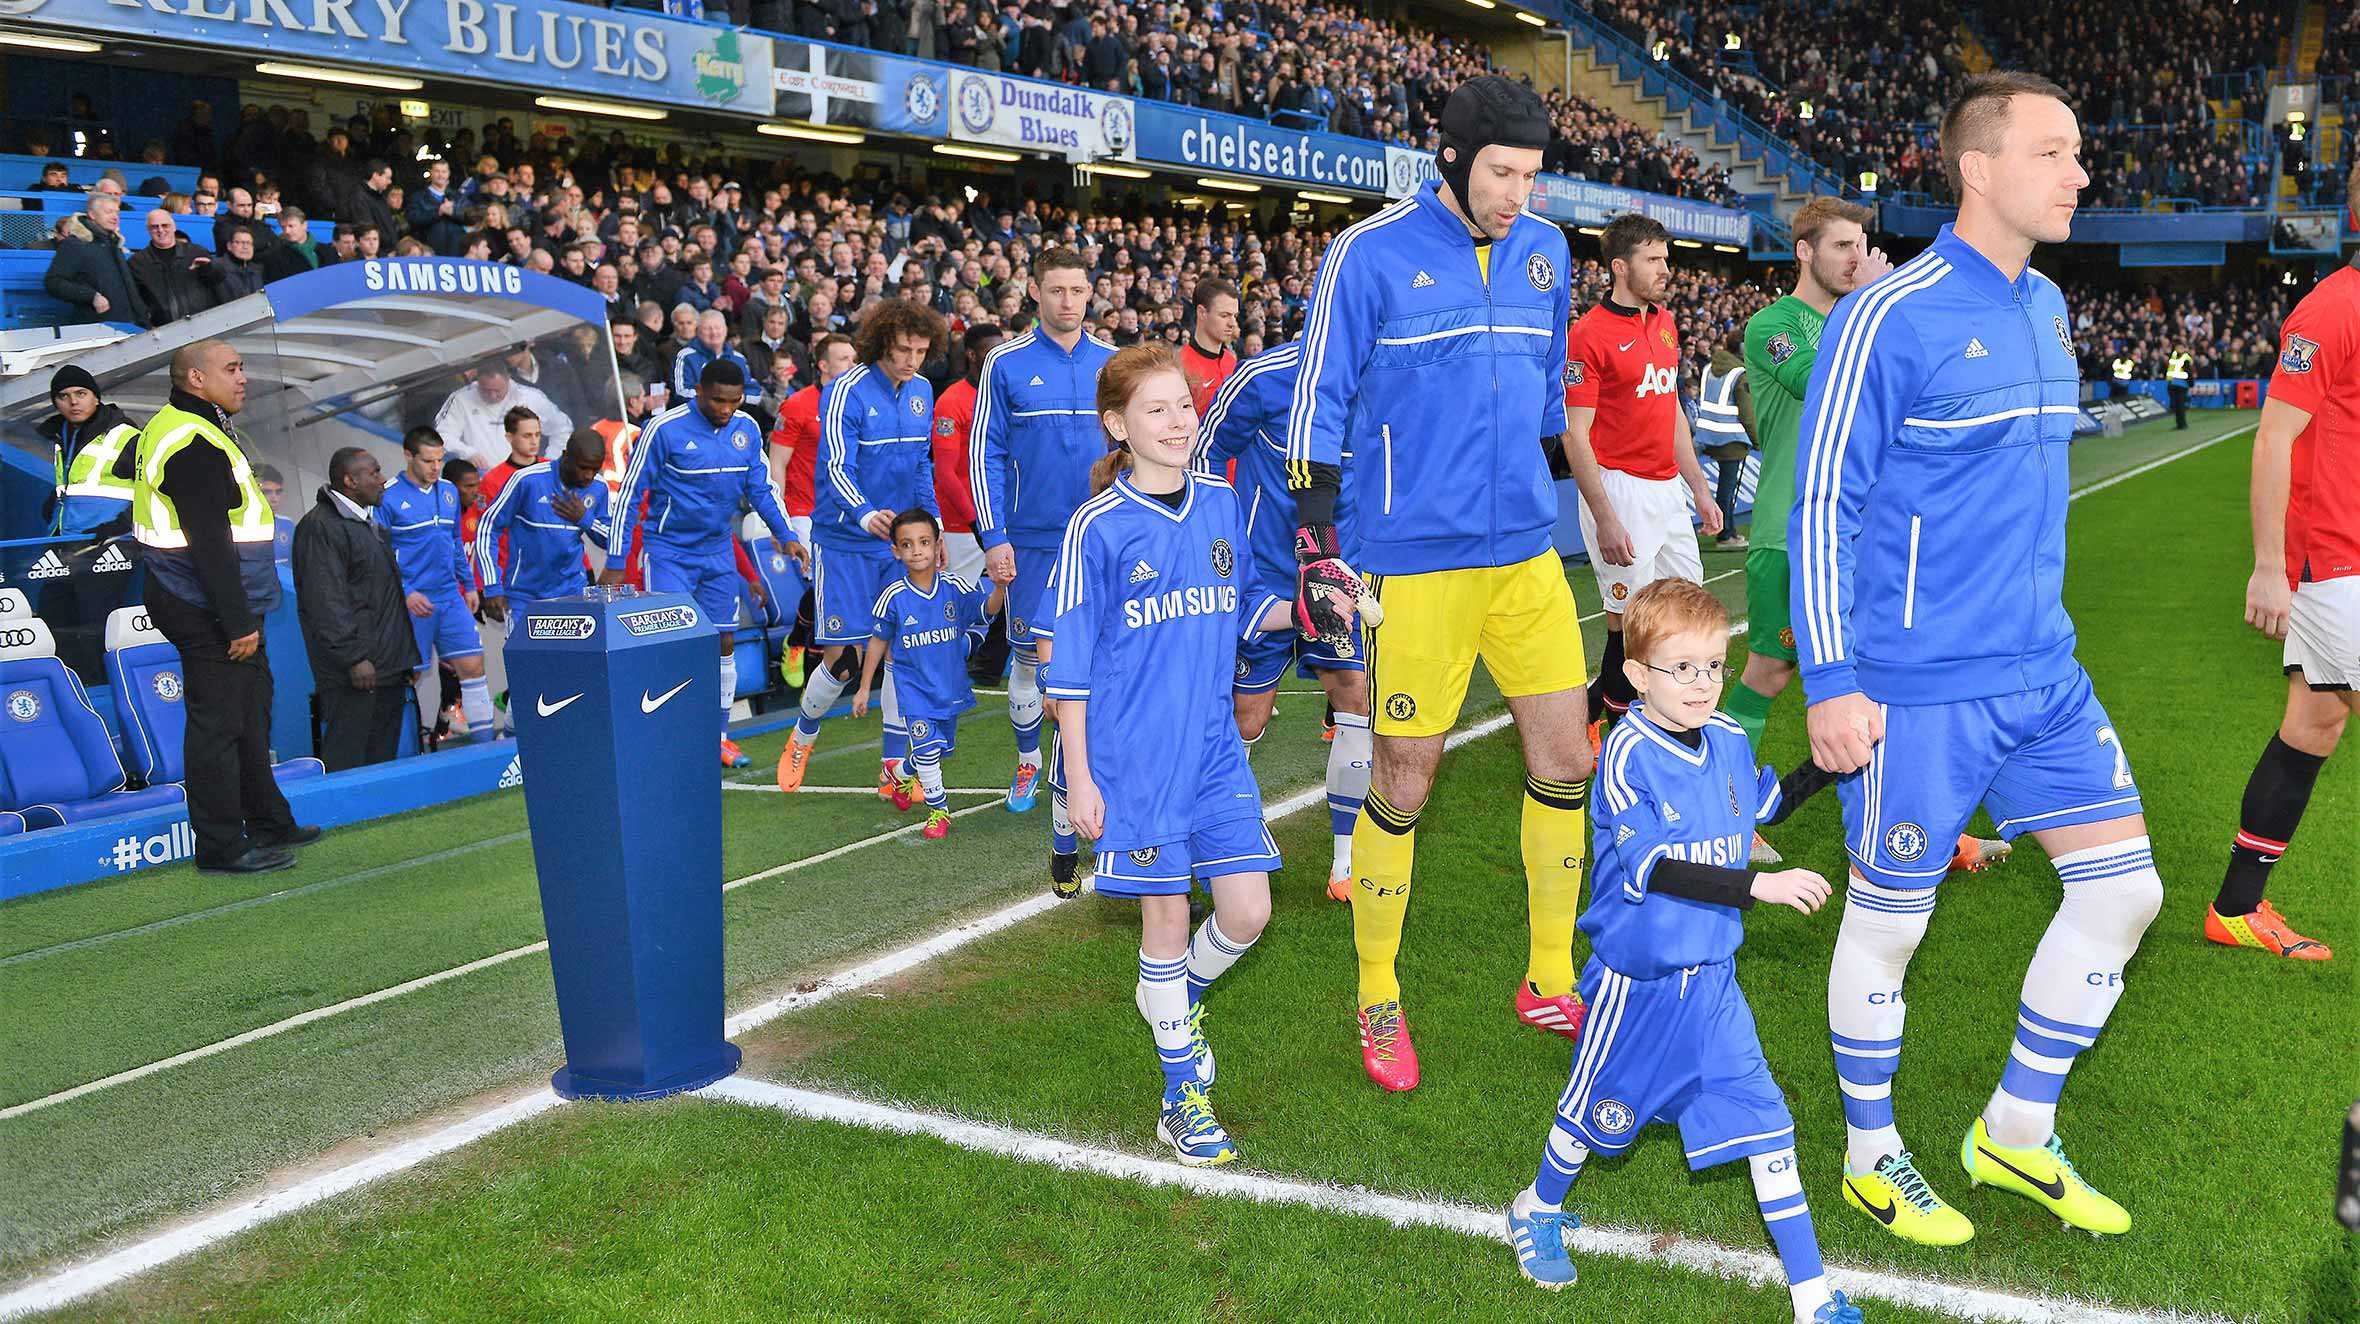 Oscar walking out with John Terry in front of the crowd at Stamford Bridge.